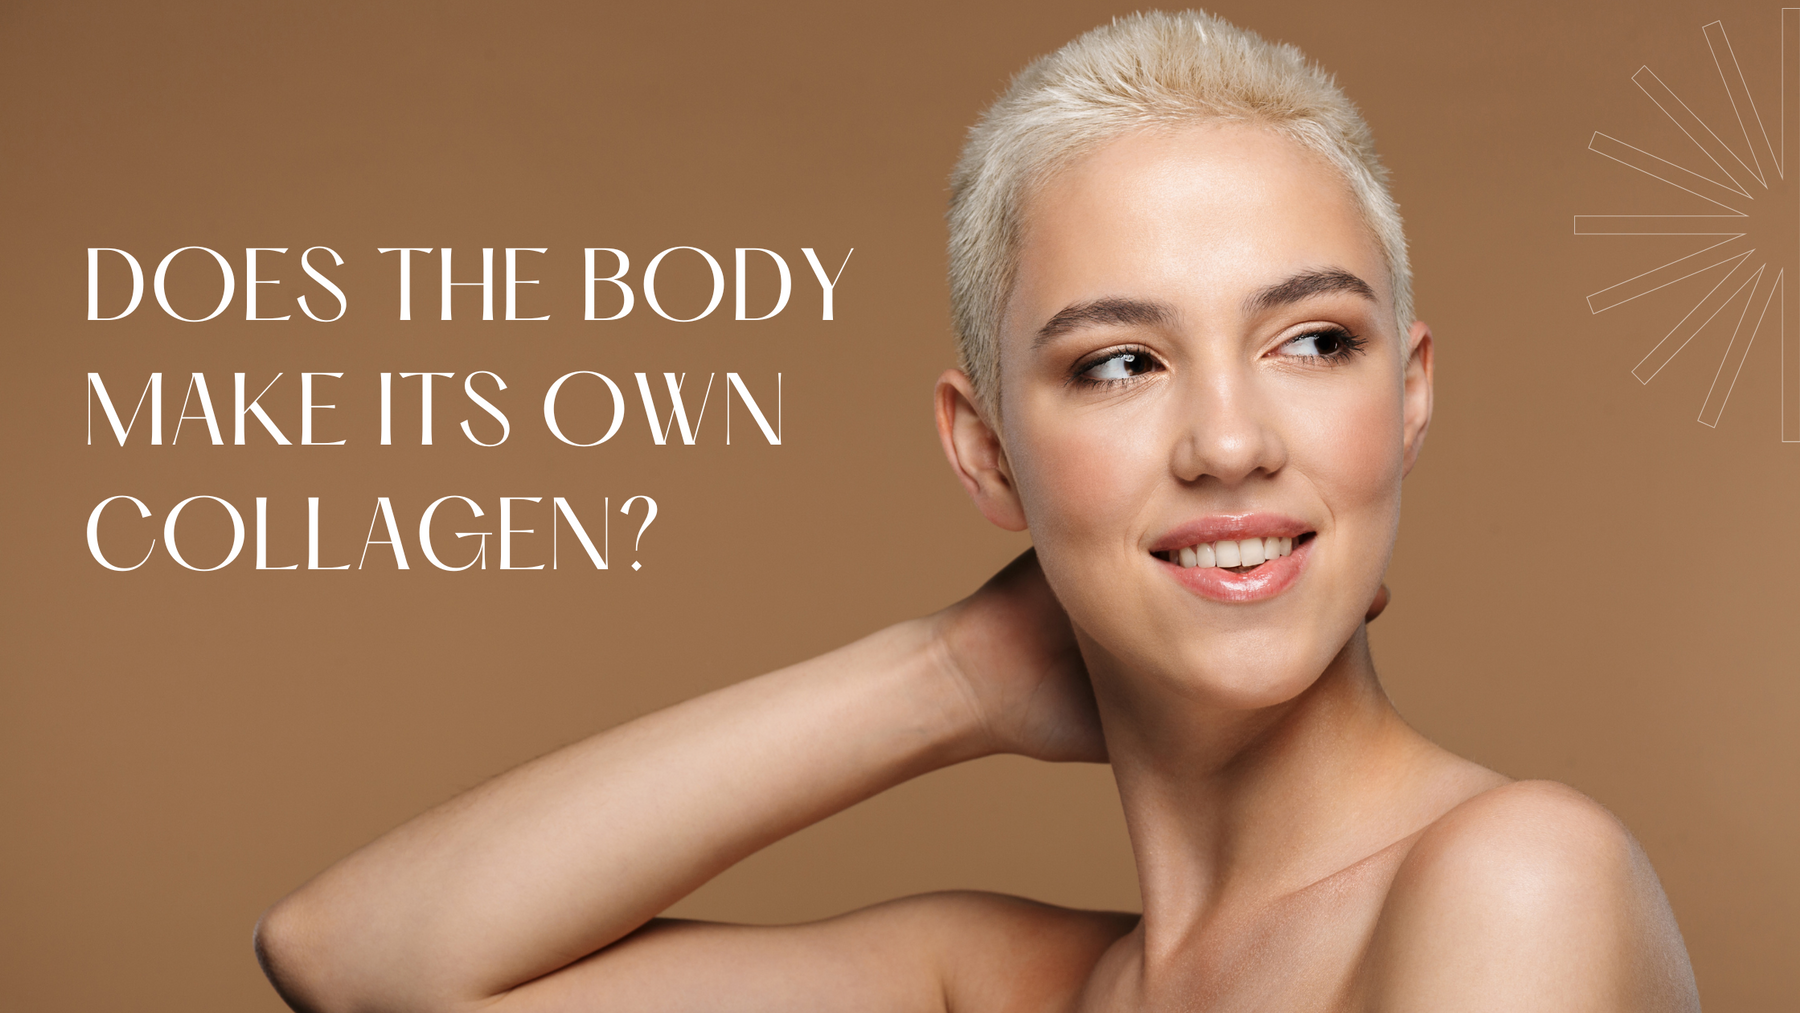 Does the body make its own collagen?